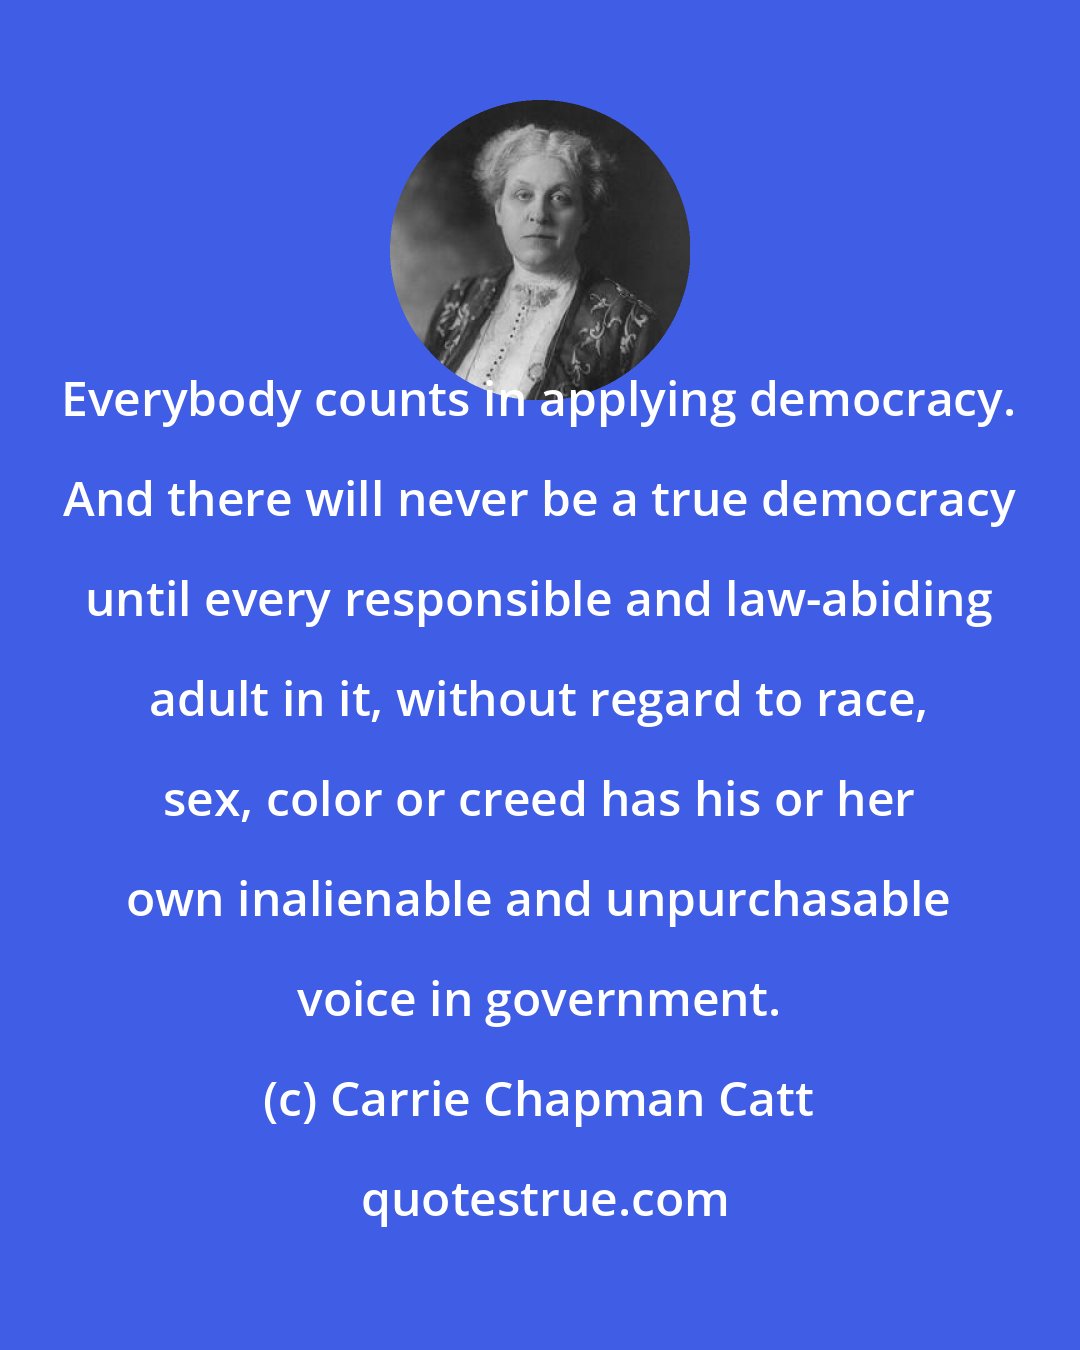 Carrie Chapman Catt: Everybody counts in applying democracy. And there will never be a true democracy until every responsible and law-abiding adult in it, without regard to race, sex, color or creed has his or her own inalienable and unpurchasable voice in government.